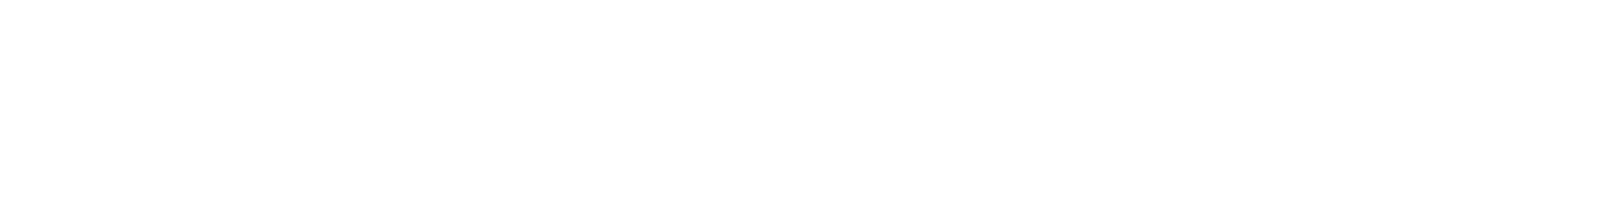 Institutional Income Strategies Channel - ETF Trends